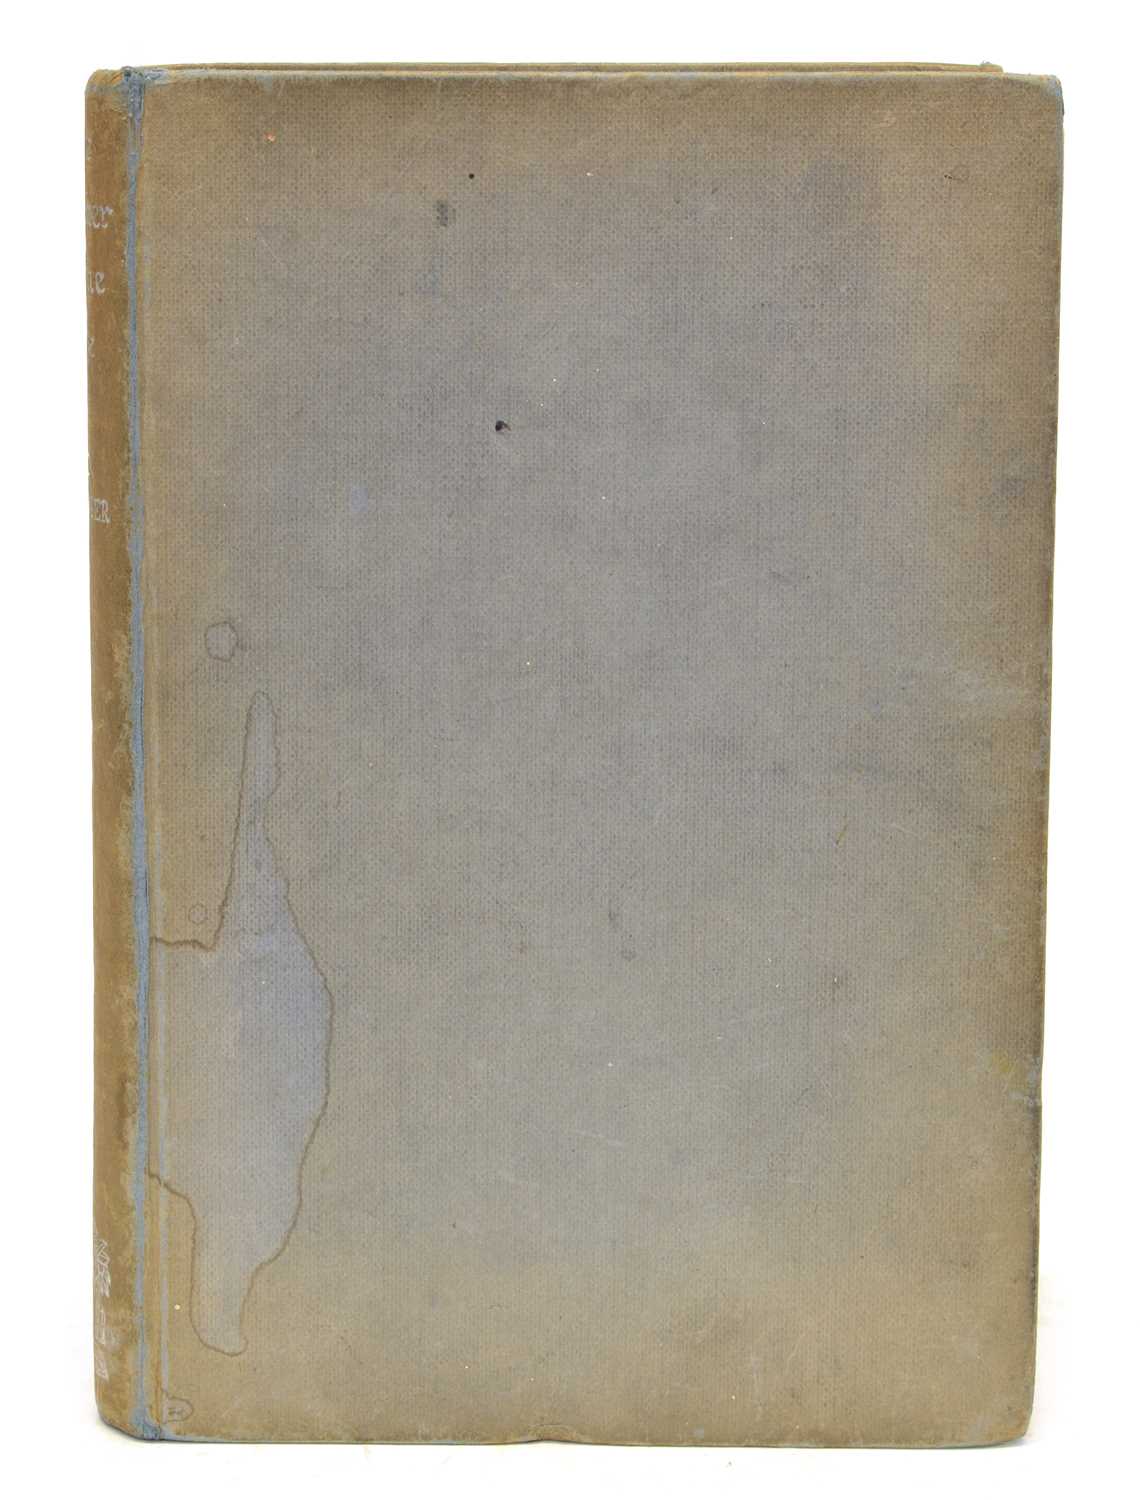 Lot 5 - The Catcher in the Rye